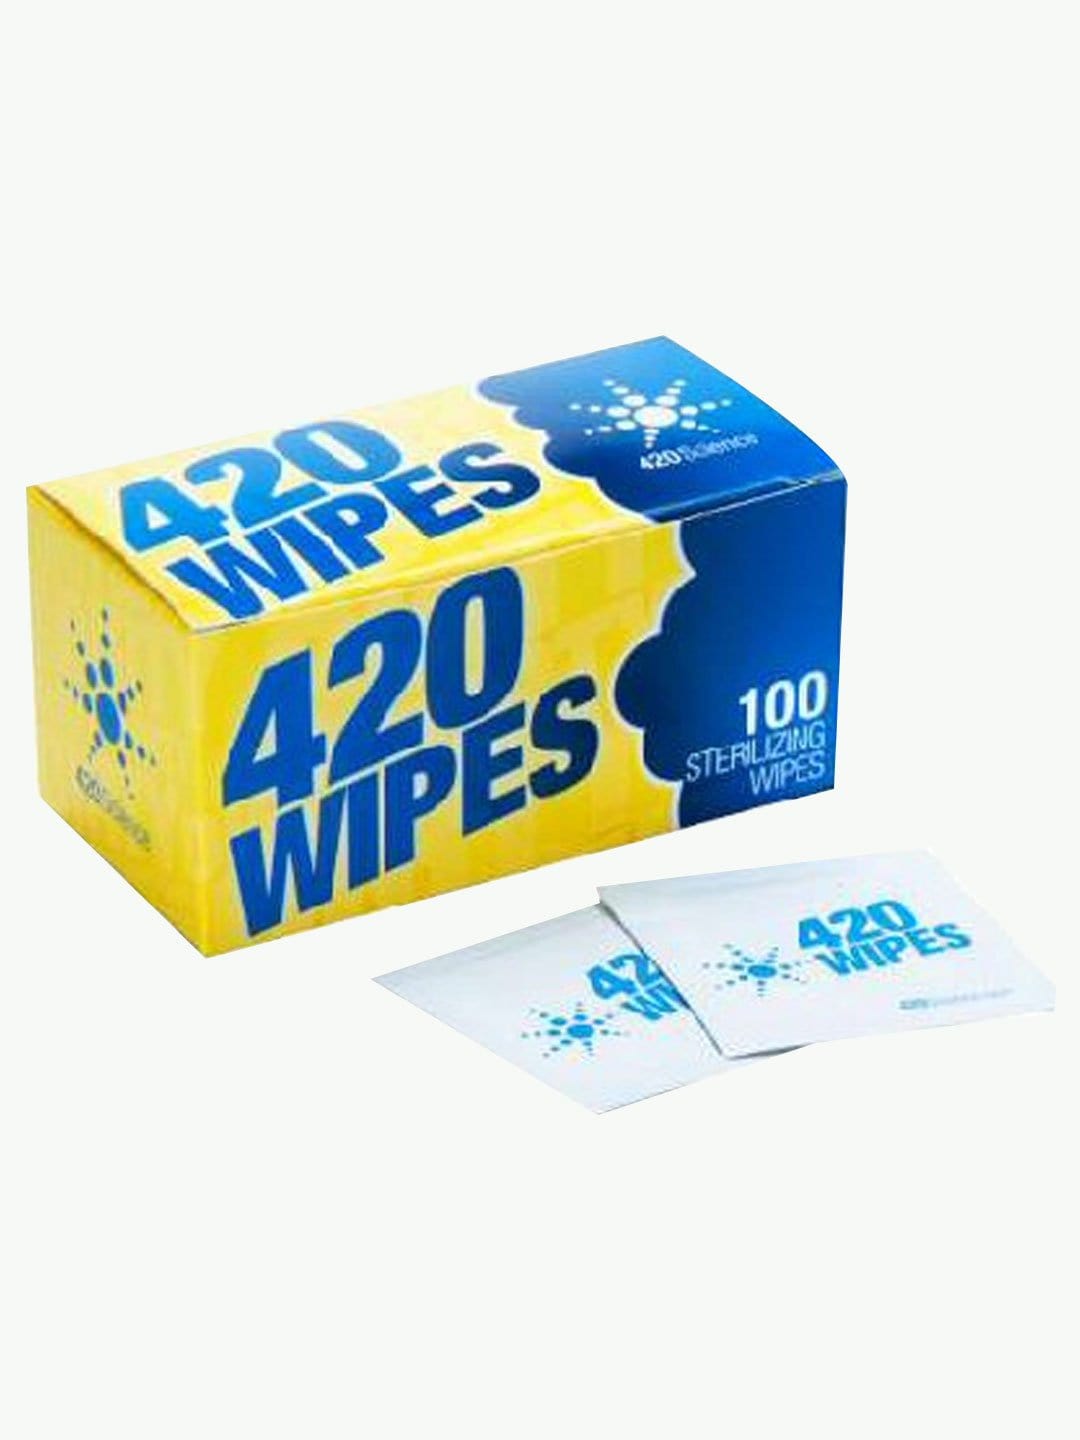 420 Wipes | Cleans Vaporisers, Bongs, Pipes, etc.